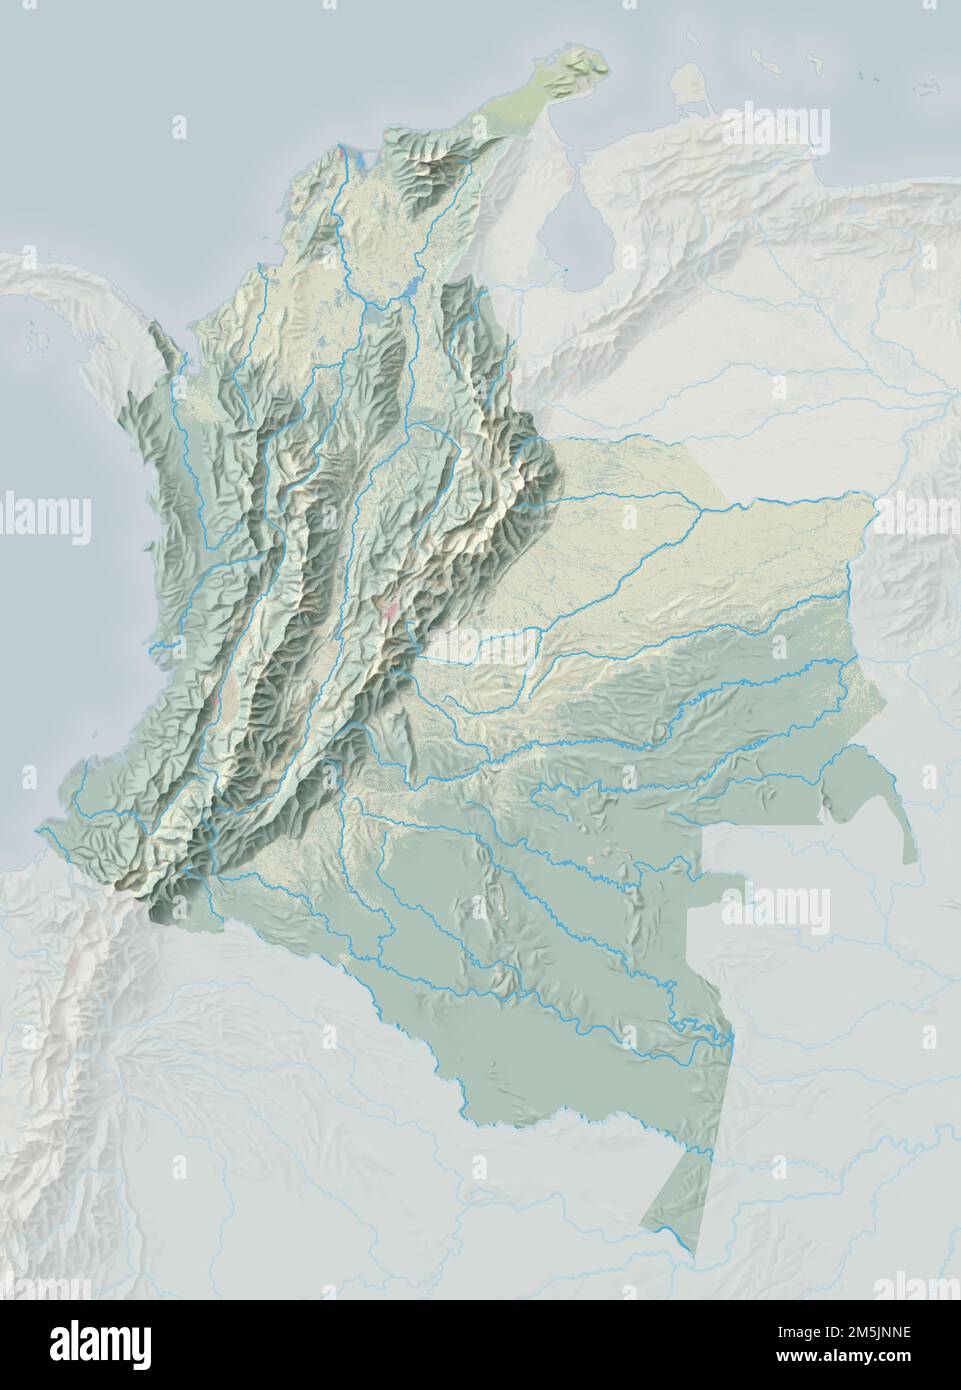 Topographic map of Colombia Stock Photo